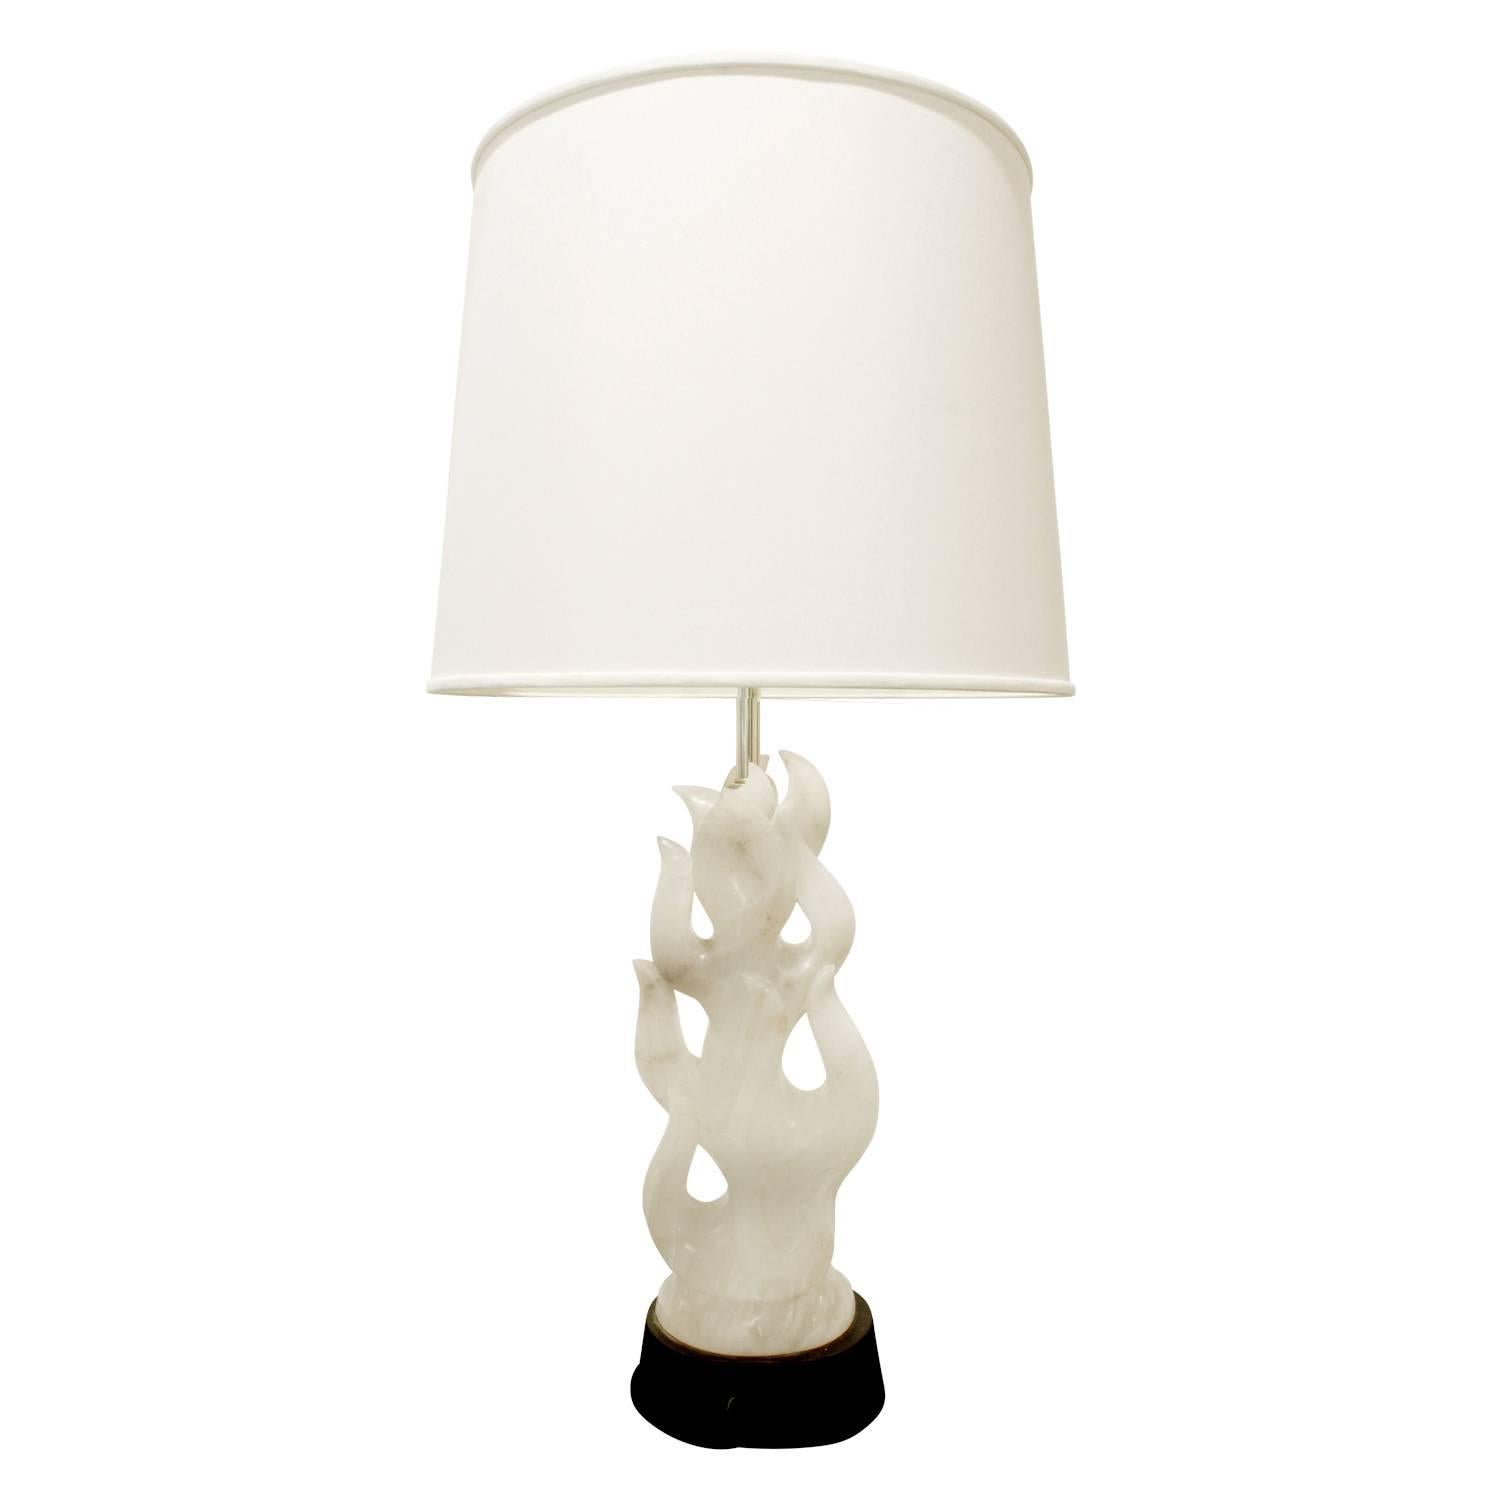 Mid-Century Modern Hand-Carved Alabaster Table Lamp, 1940s